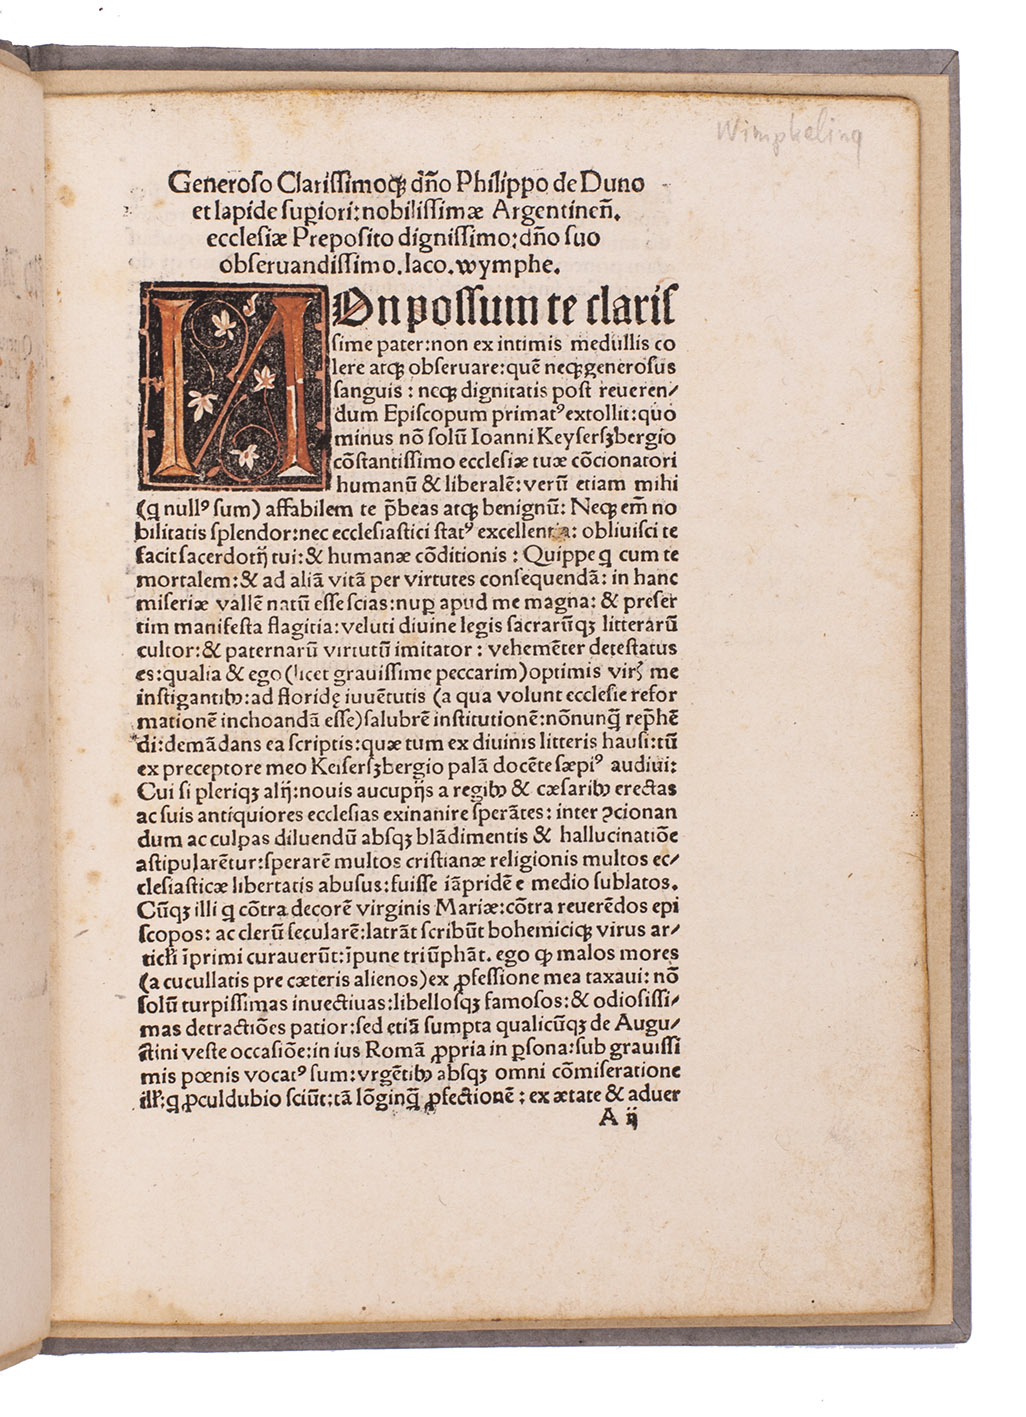 WIMPFELING, Jakob (Jacobus WIMPHELINGIUS). - Ad Julium. II. Po[n]tifice[m] Max[imum]. Querulosa excusatio Jacobi Wimphelingii ad instantiam fratru[m] Augustine[n]sium ad curiam romana[m] citati: ut propria in persona ibide[m] compareat: proptereaq[ue] scripsit divum Augustinum non fuisse monachum vel fratrem mendicante[m].[Strasbourg, Jean Prss the elder, ca. 1507]. 4to (21 x 15 cm). With a large woodcut decorated initial. Set in 2 sizes of roman type with a few words in a large textura gothic type. With the initial coloured brown by an early hand. Boards covered with grey laid paper (1940s?).